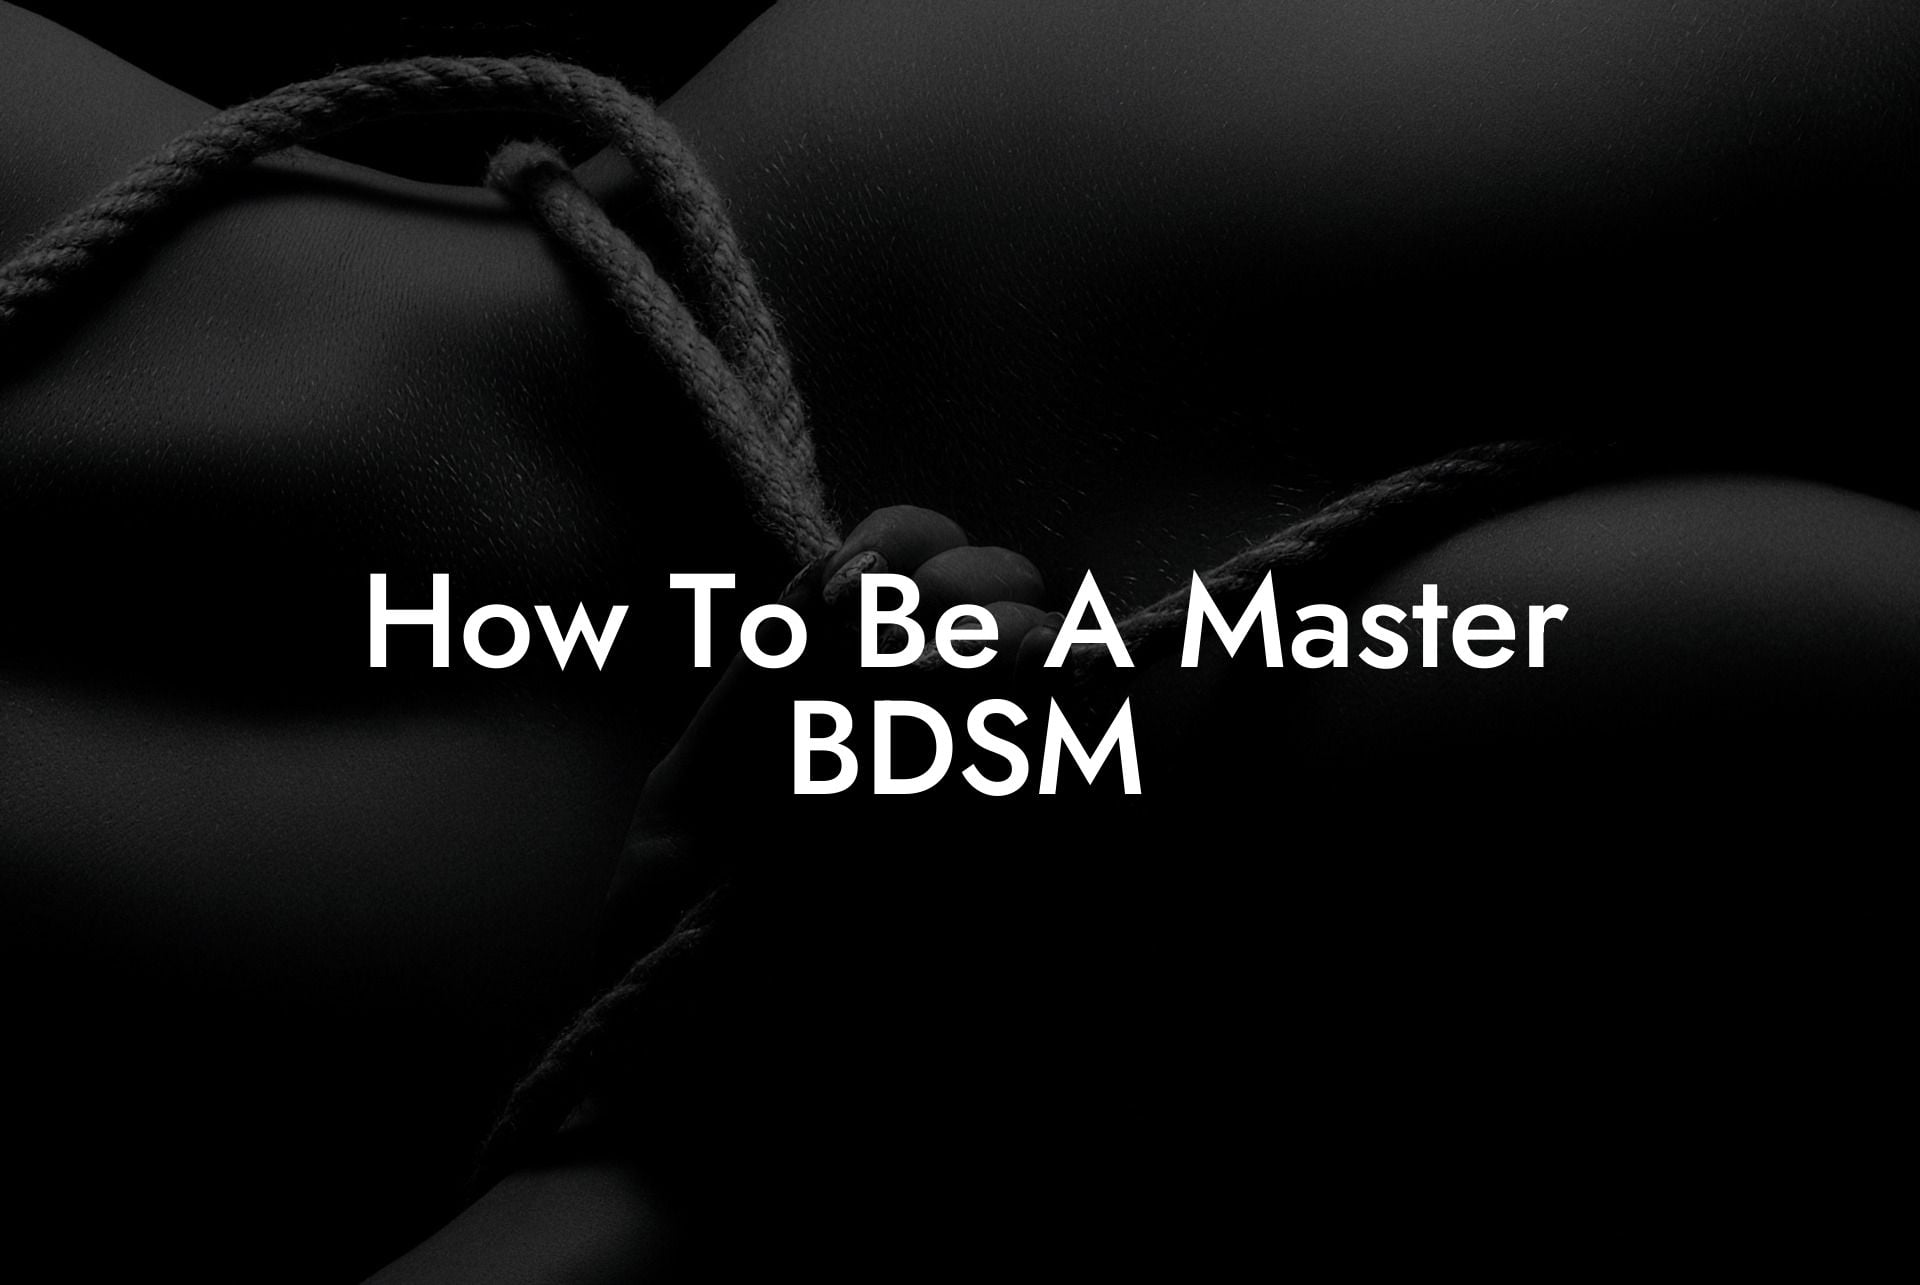 How To Be A Master BDSM